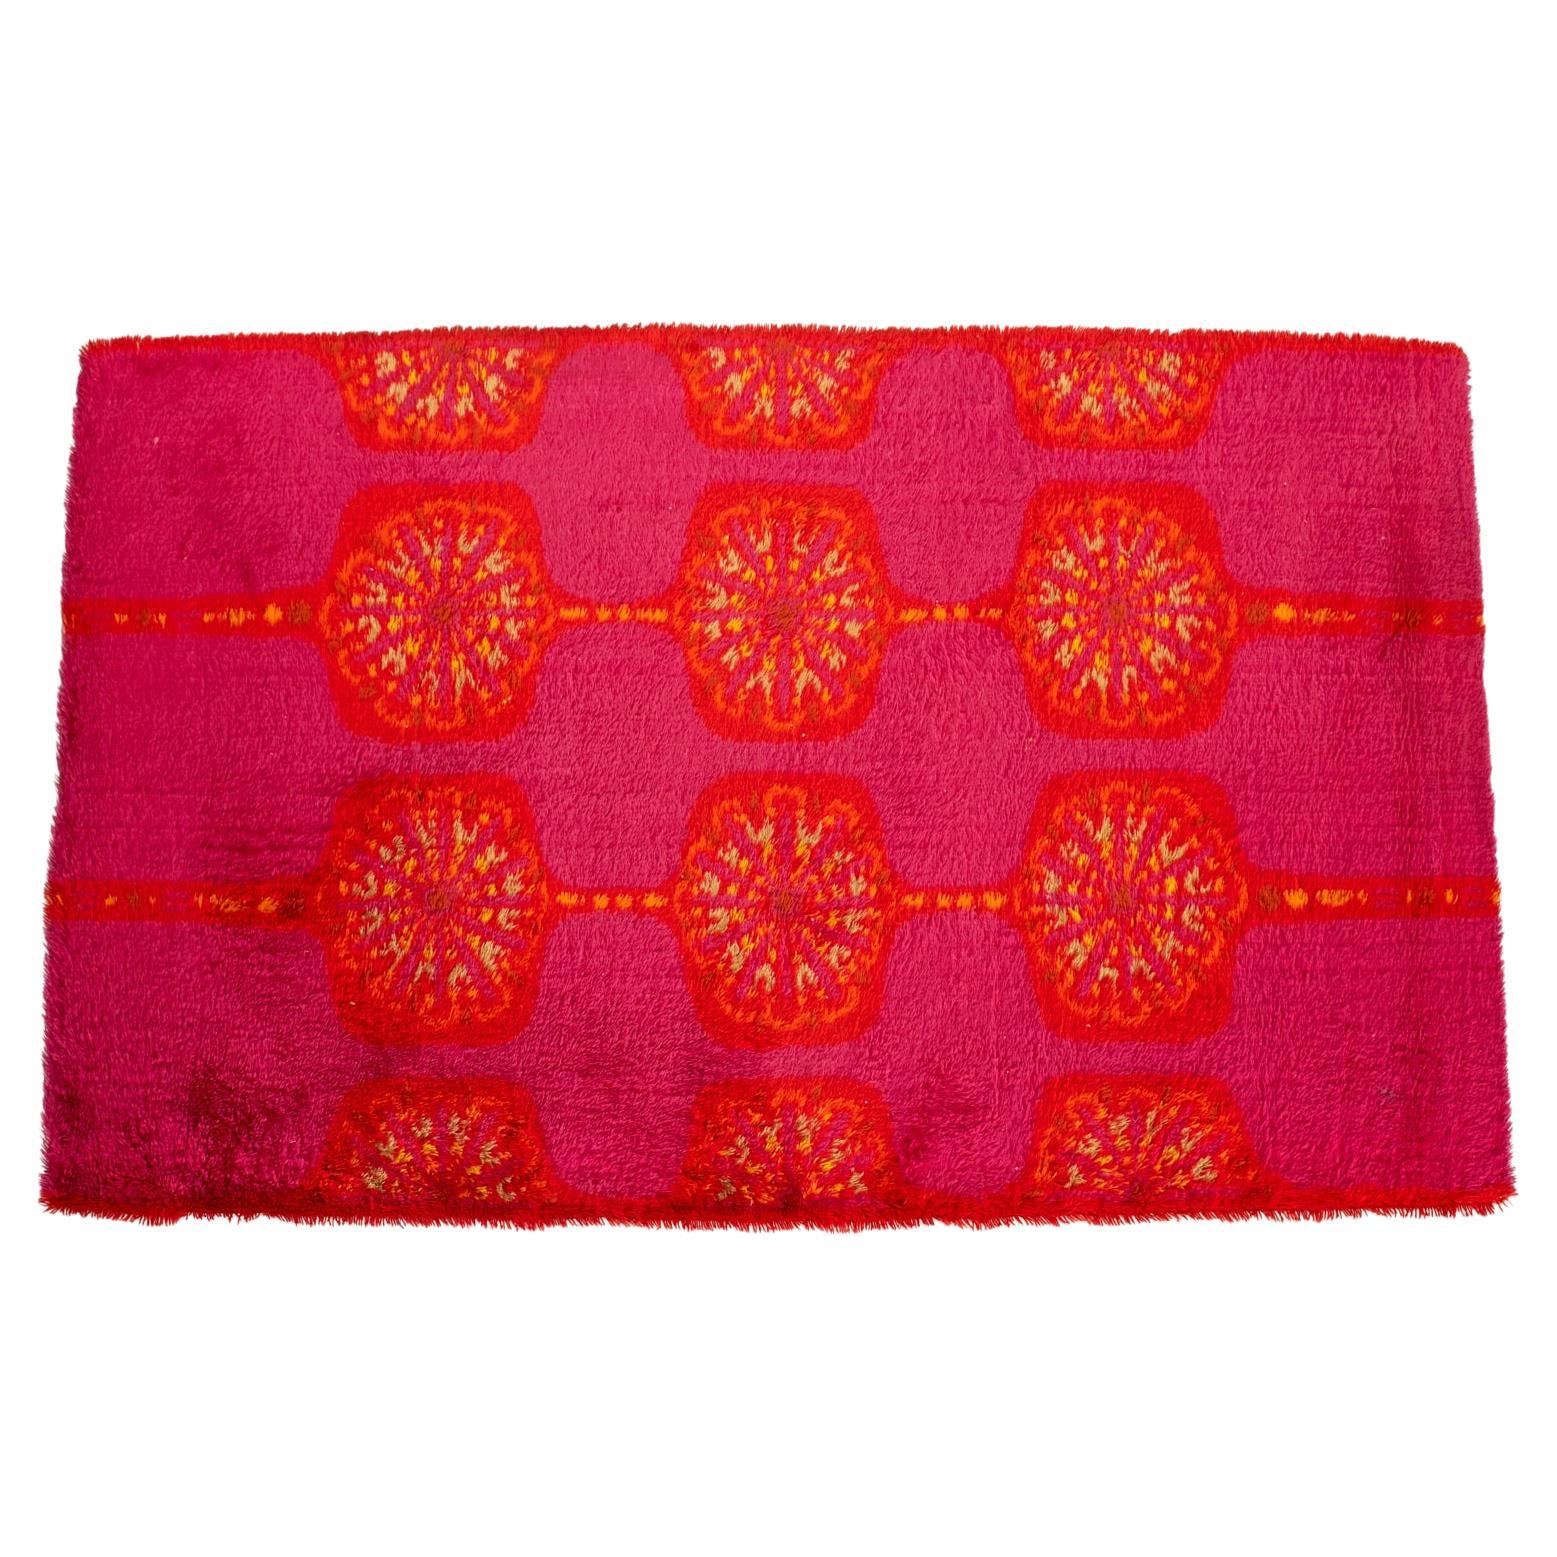 Modernist Rya Shag Carpet, Stylized Red and Orange Florals on a Fuchsia Ground For Sale